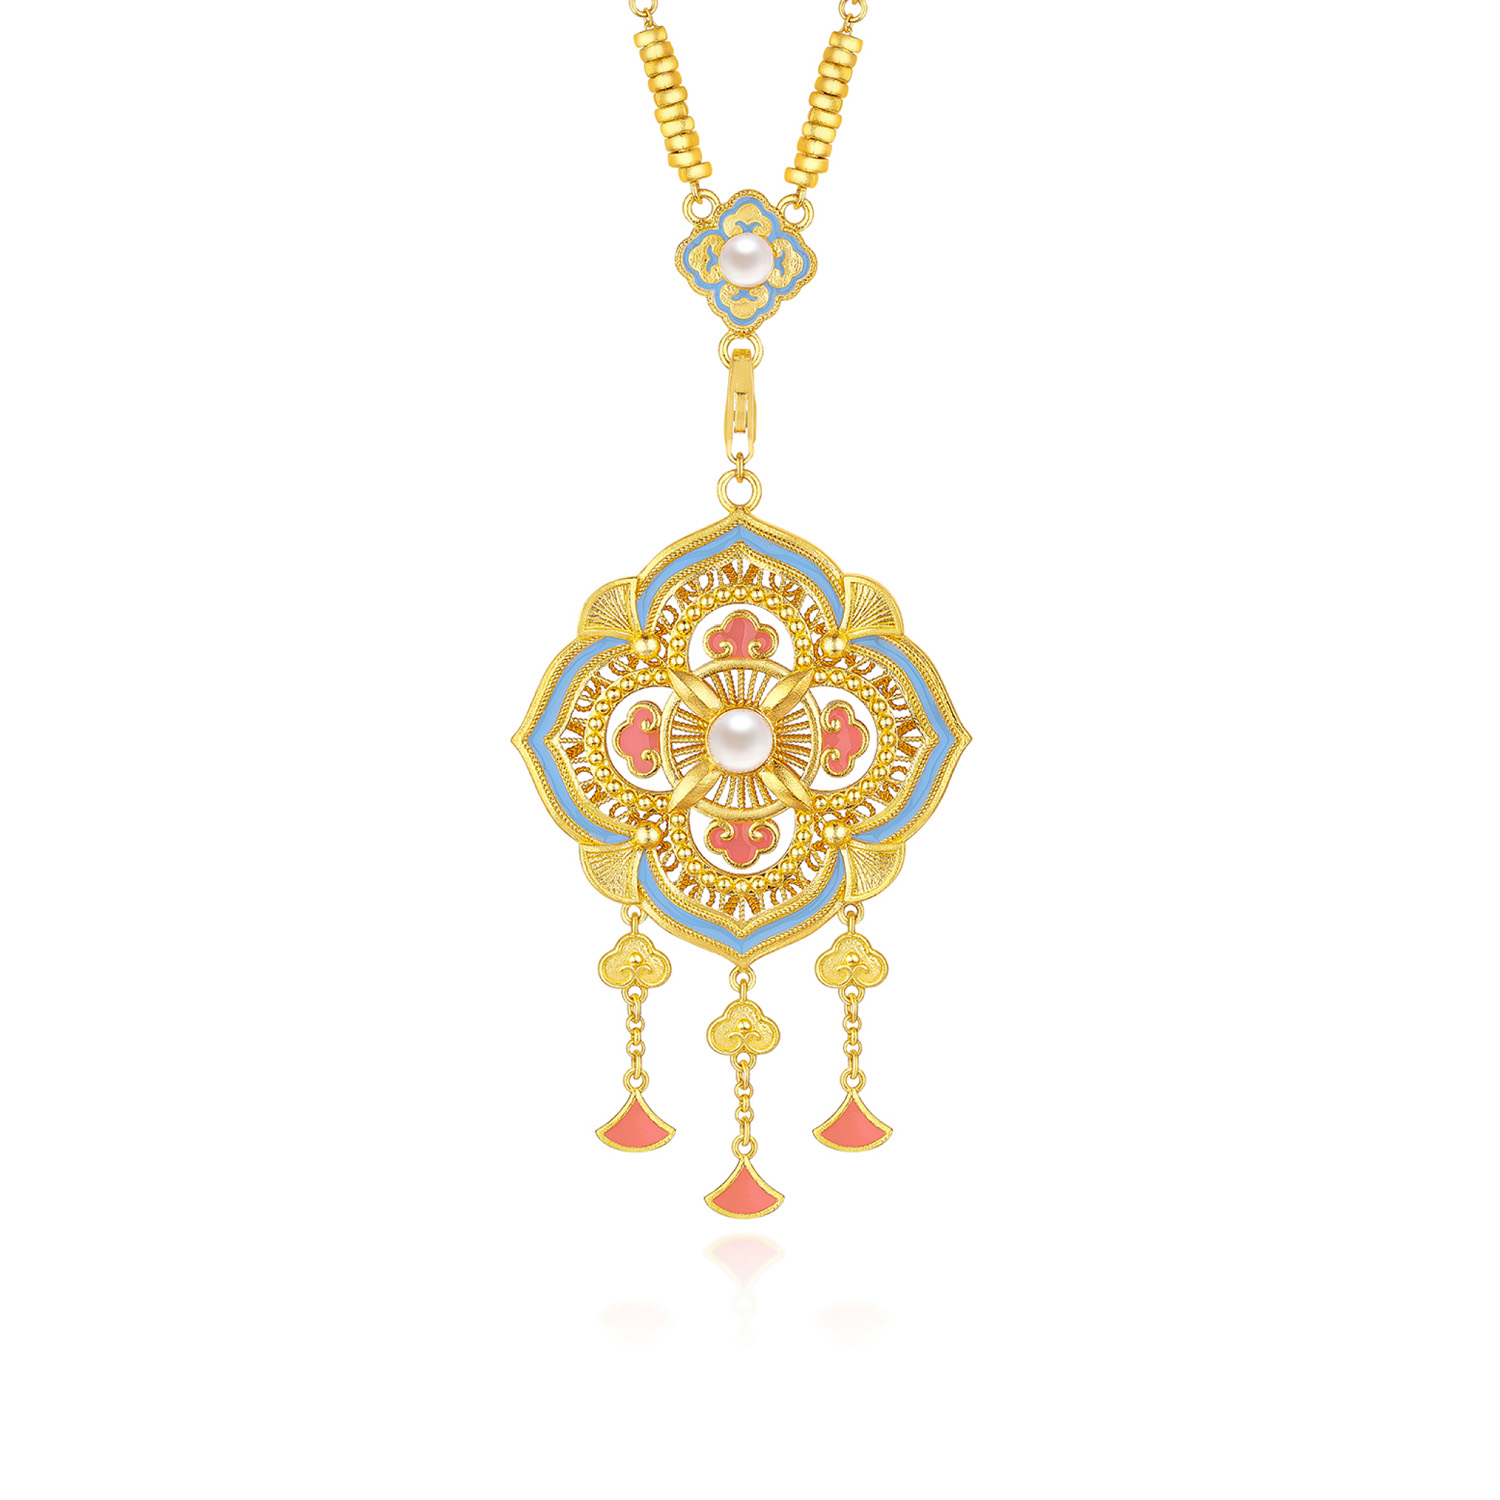 Heirloom Fortune - Charm of Song Dynasty Collection " Exquisite Knot" Gold Pearl Pendant and Necklace